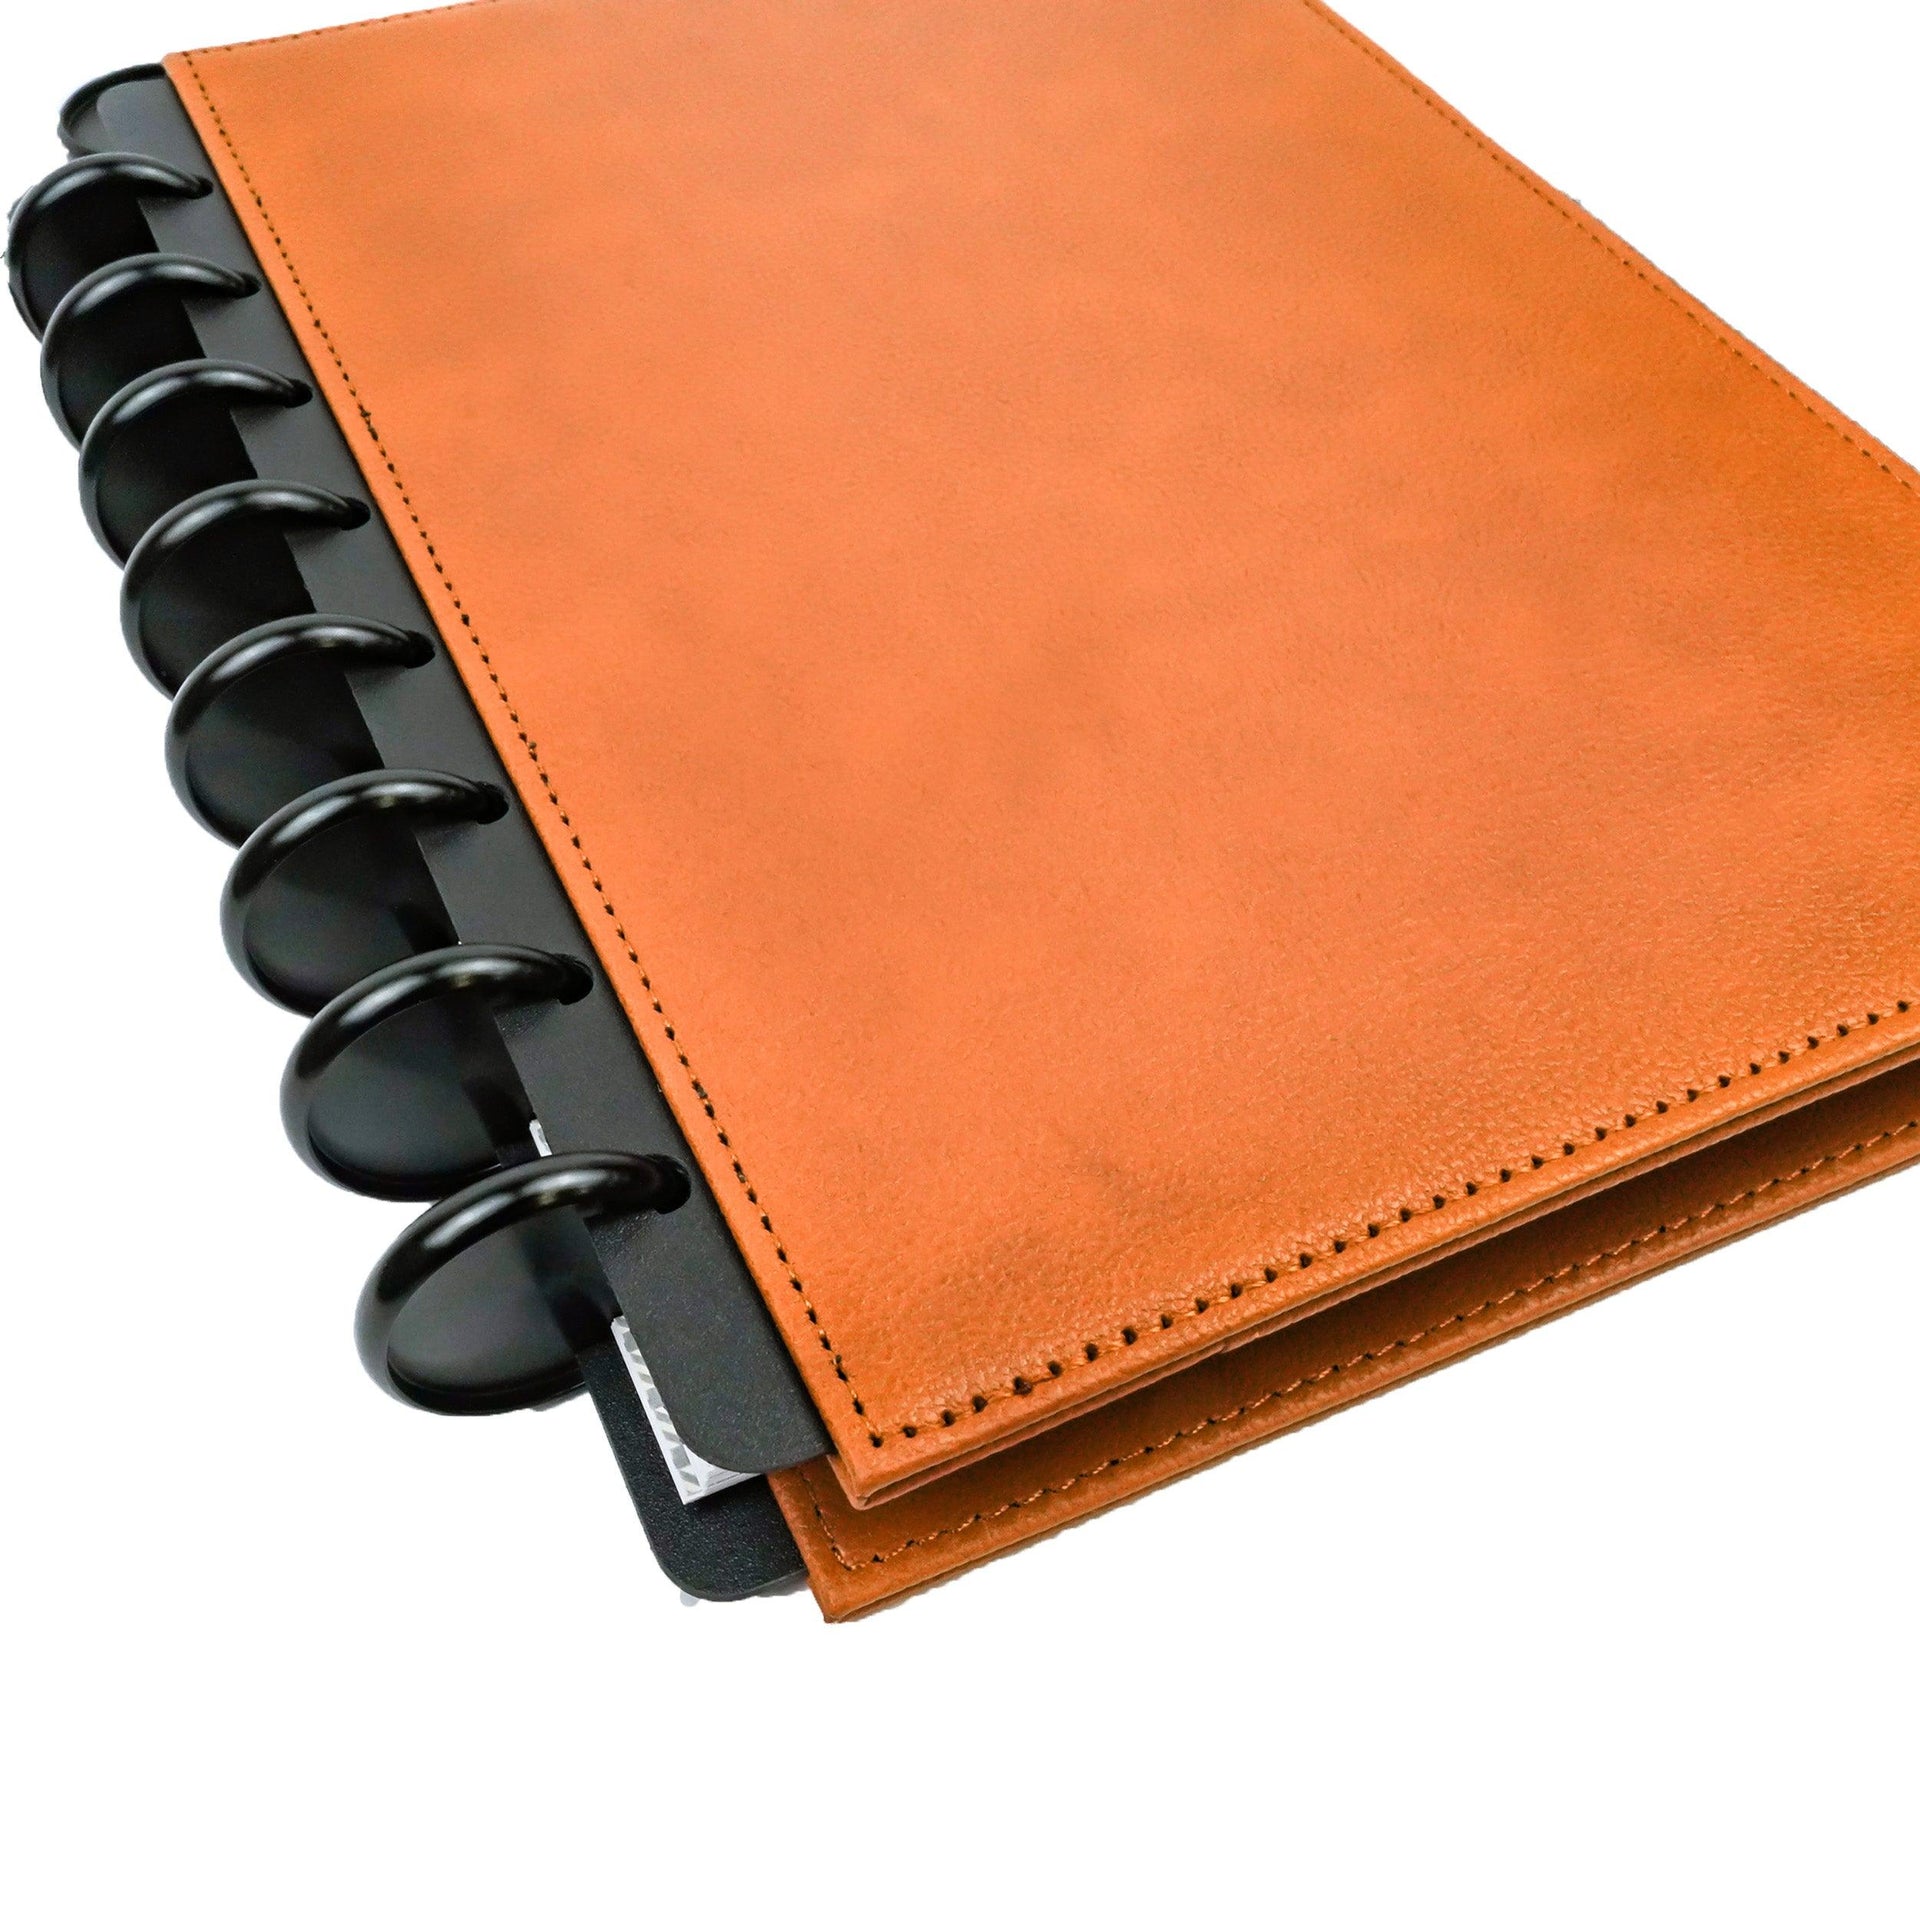 Vegan leather planner covers for discbound planners by Janes Agenda a planner lifestyle brand.